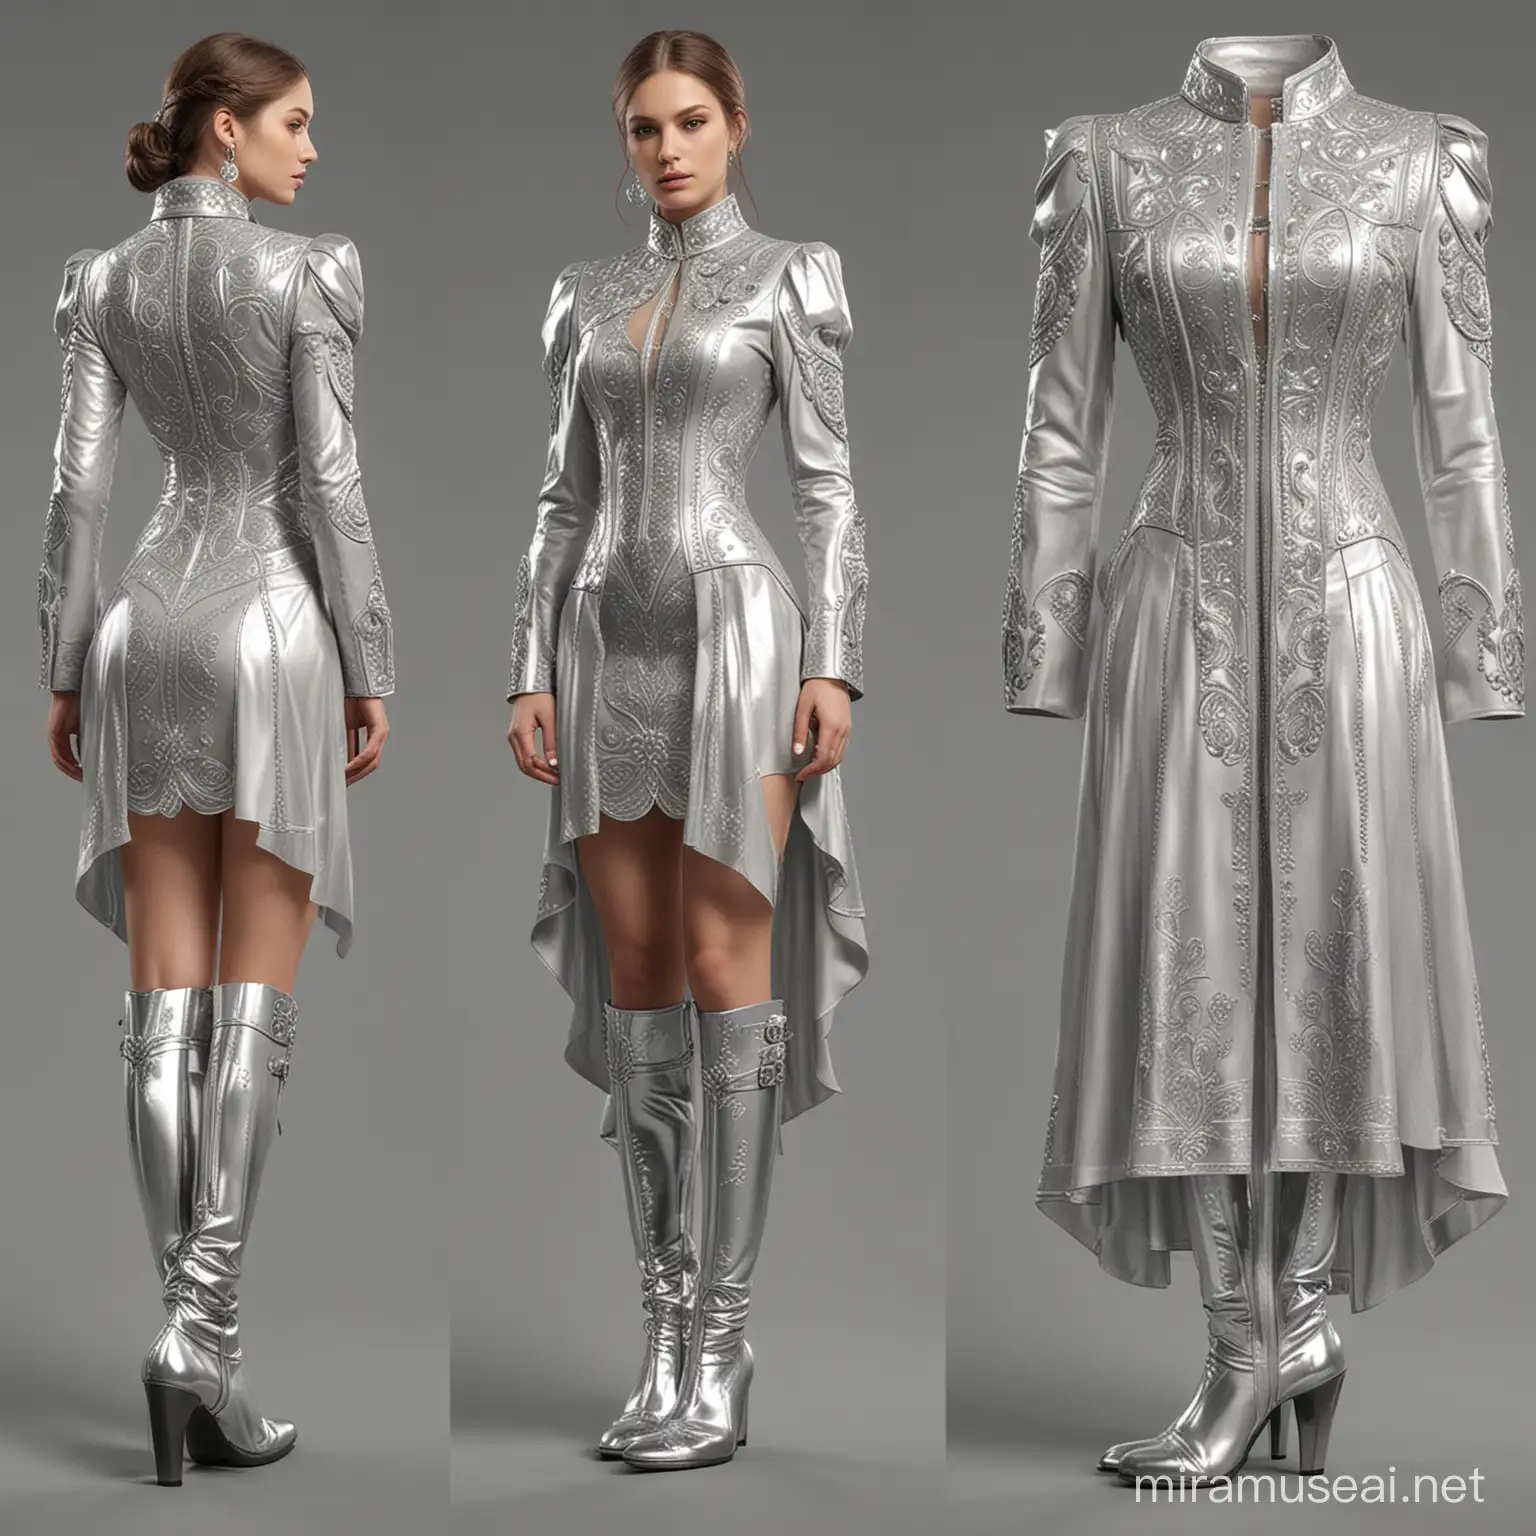 Design a luxury fashionable dress which is suitable for boots in the theme of casiphia, silver and old aesthetic money